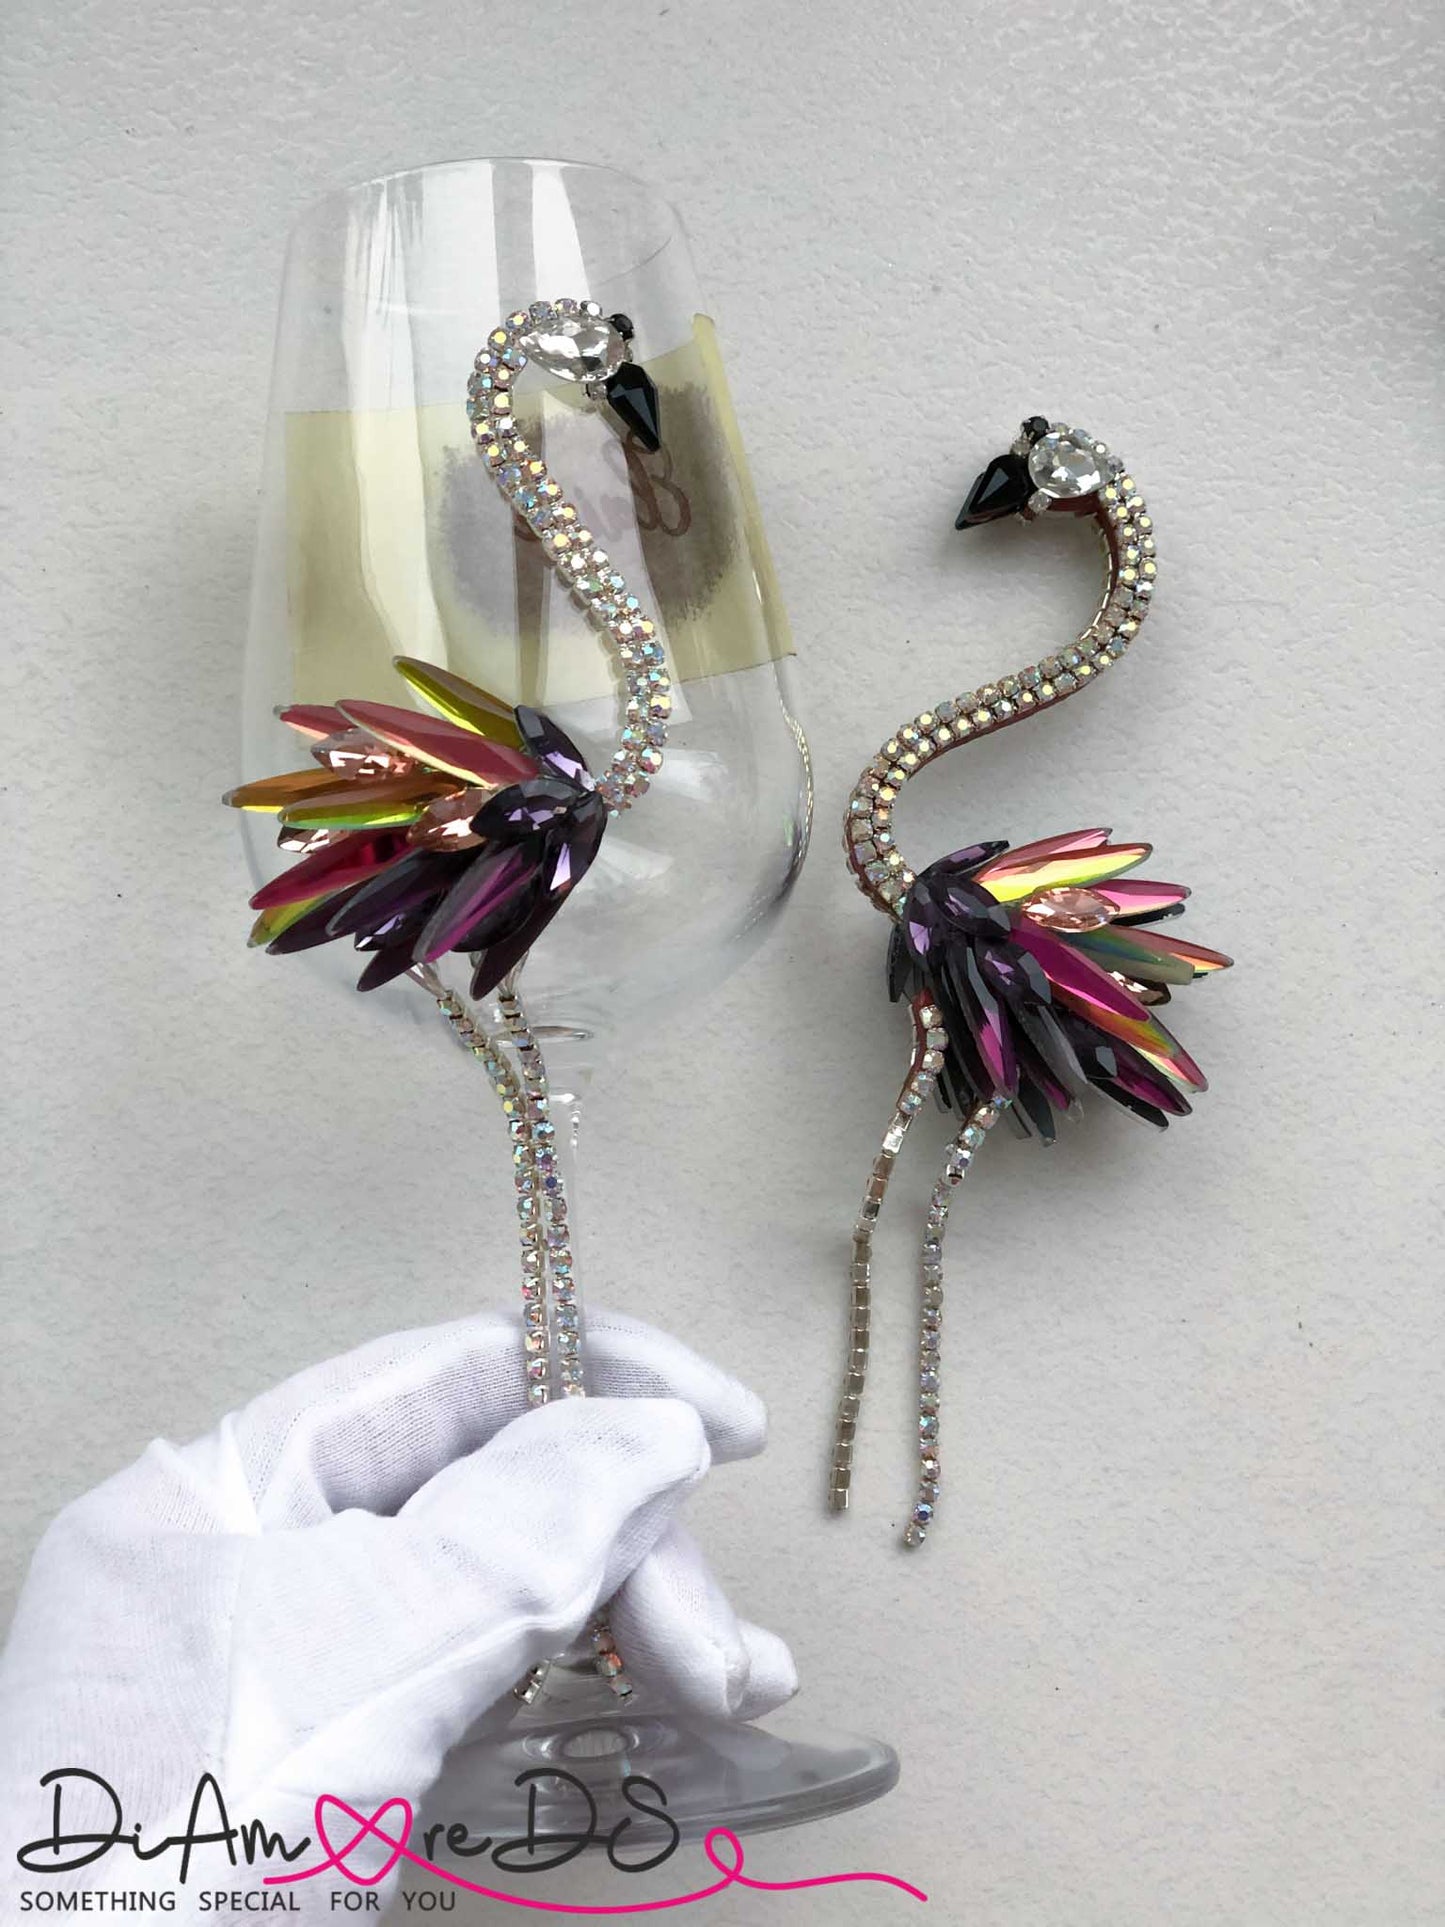 Whimsical champagne flutes with flamingos